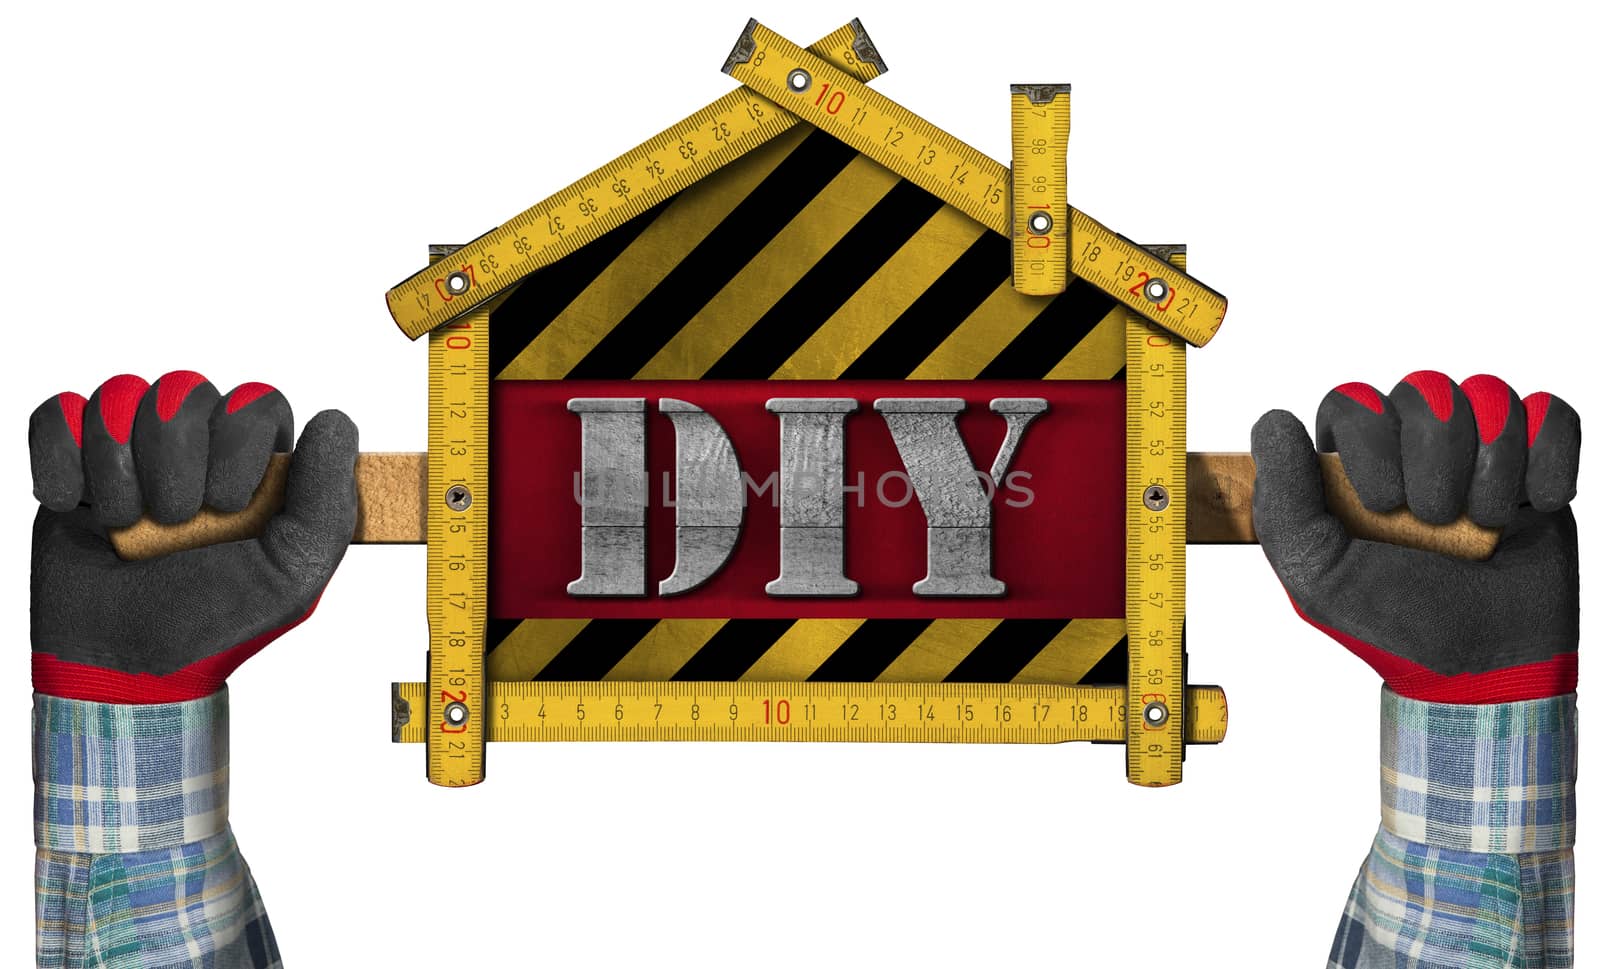 Do It Yourself - DIY -  Sign Shaped House by catalby